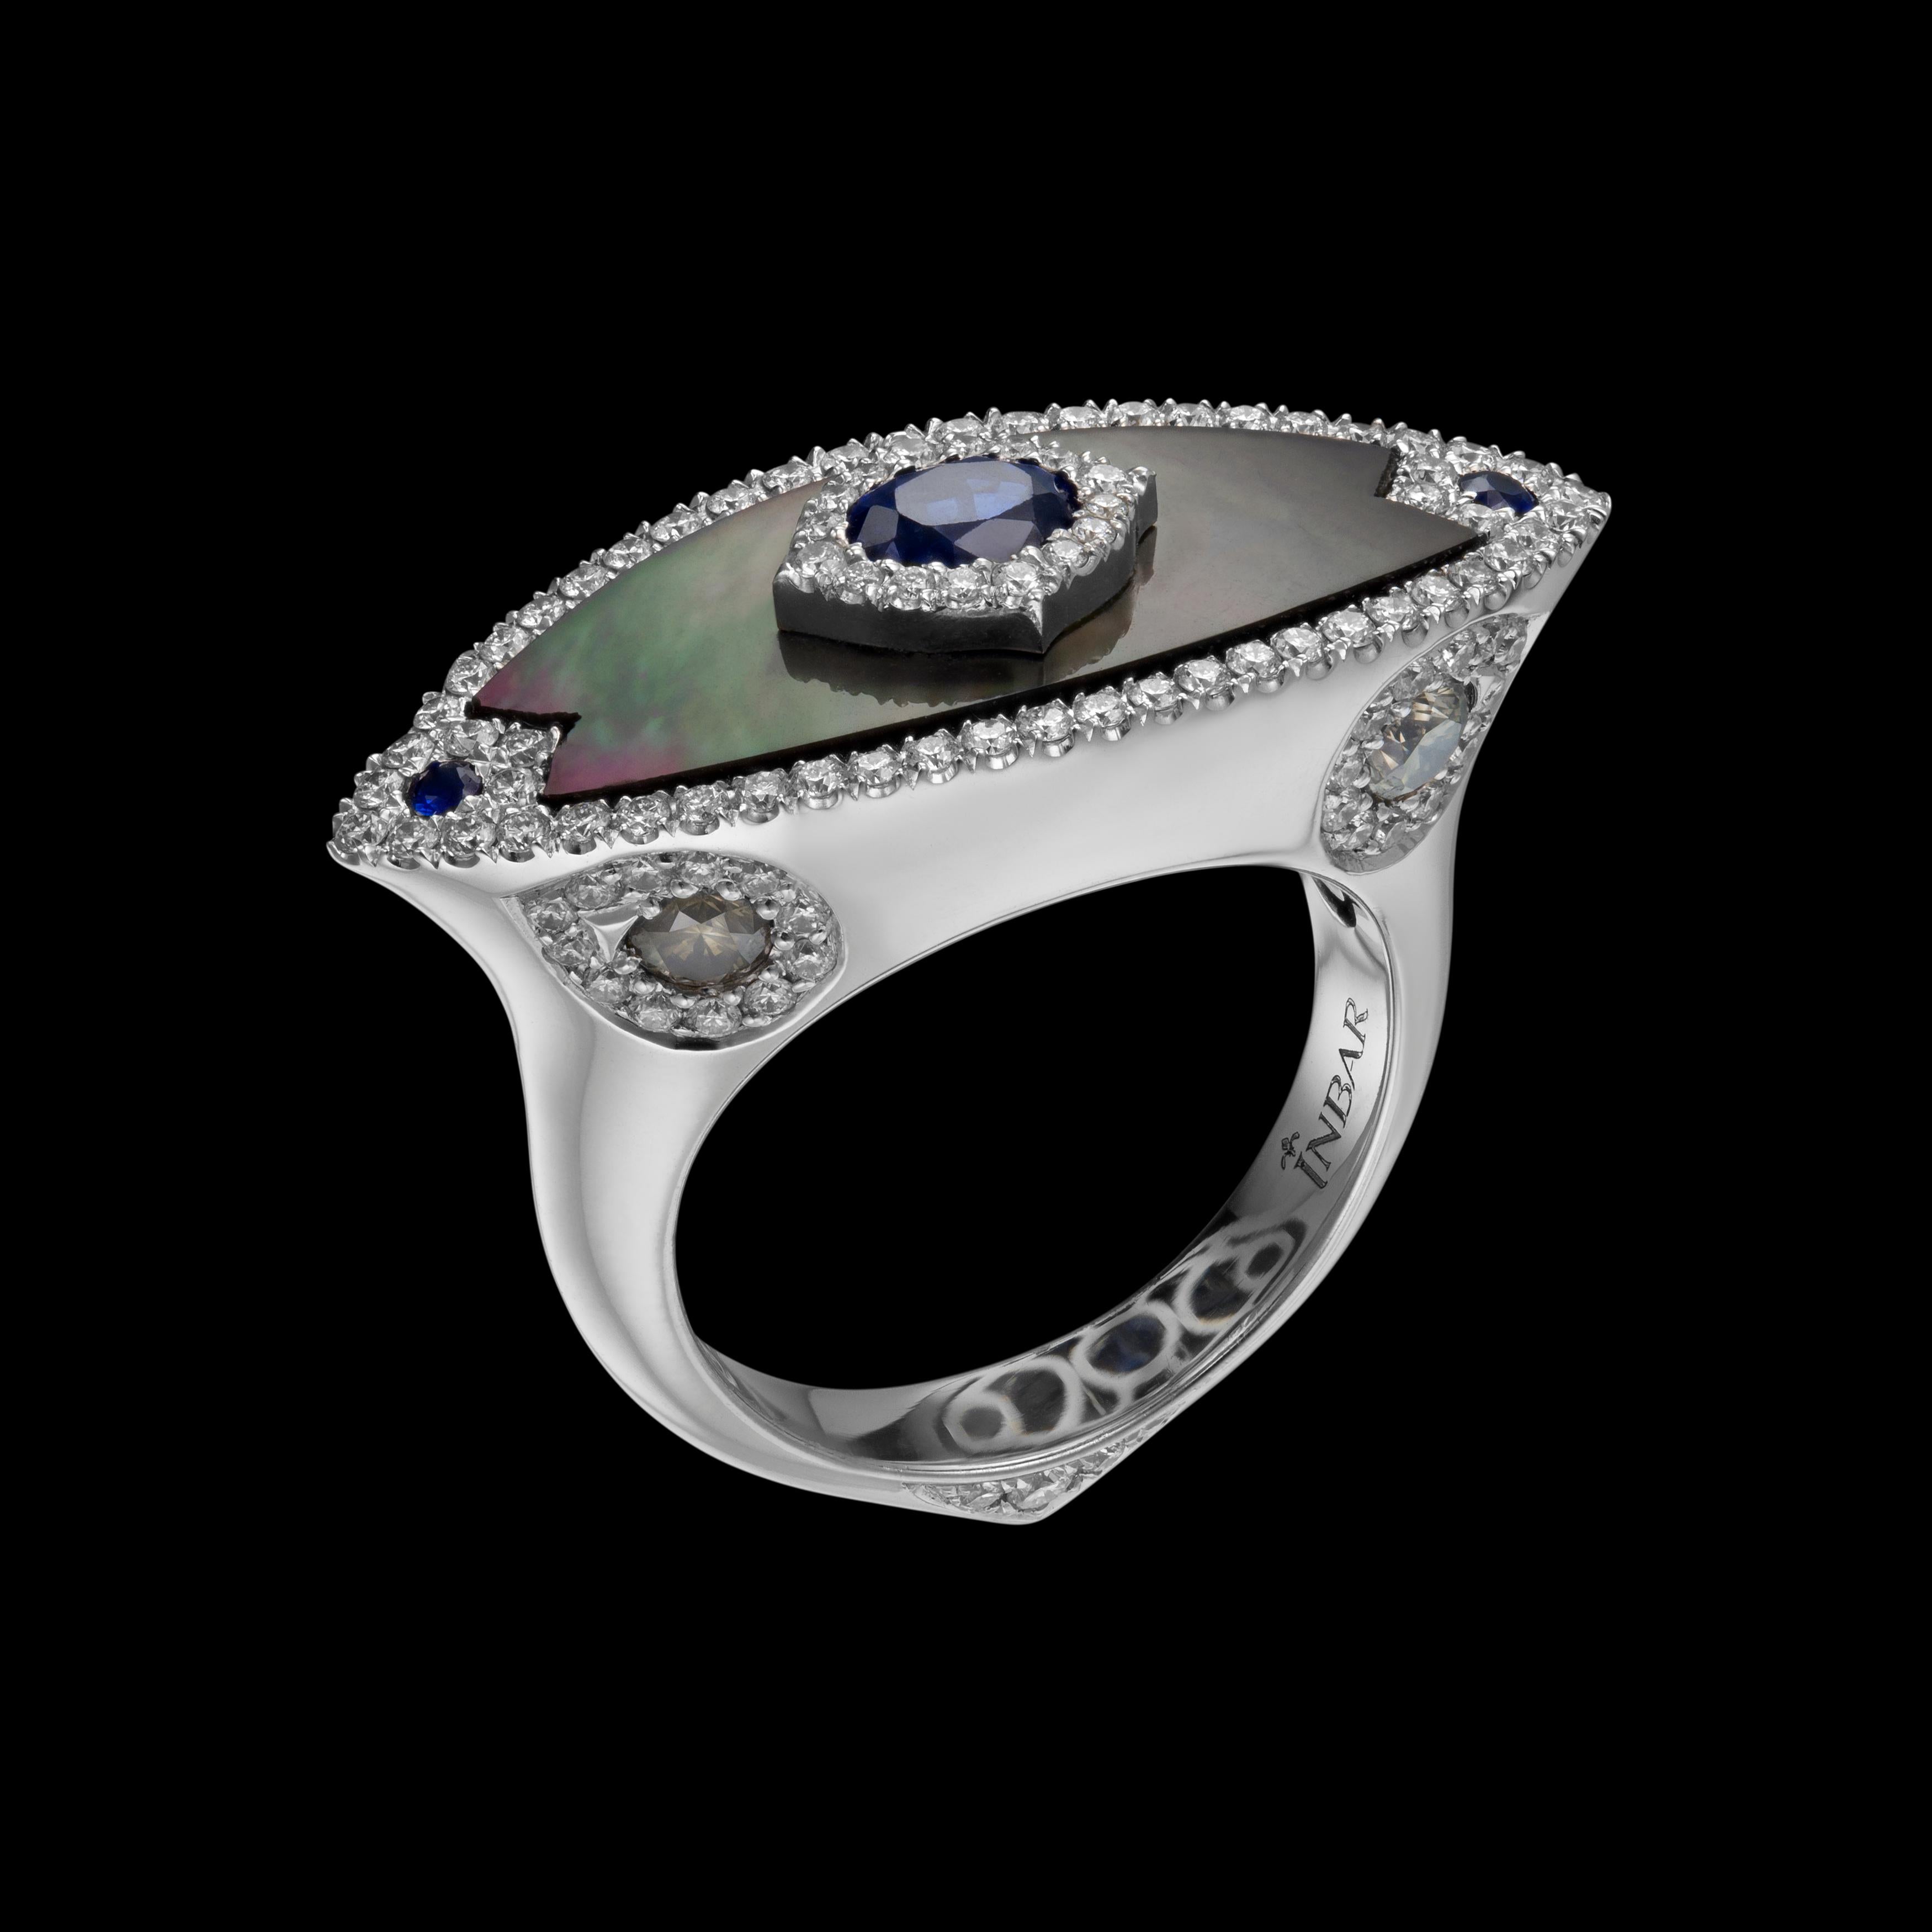 East west Mother of pearl and diamond ring set with a center sapphire.